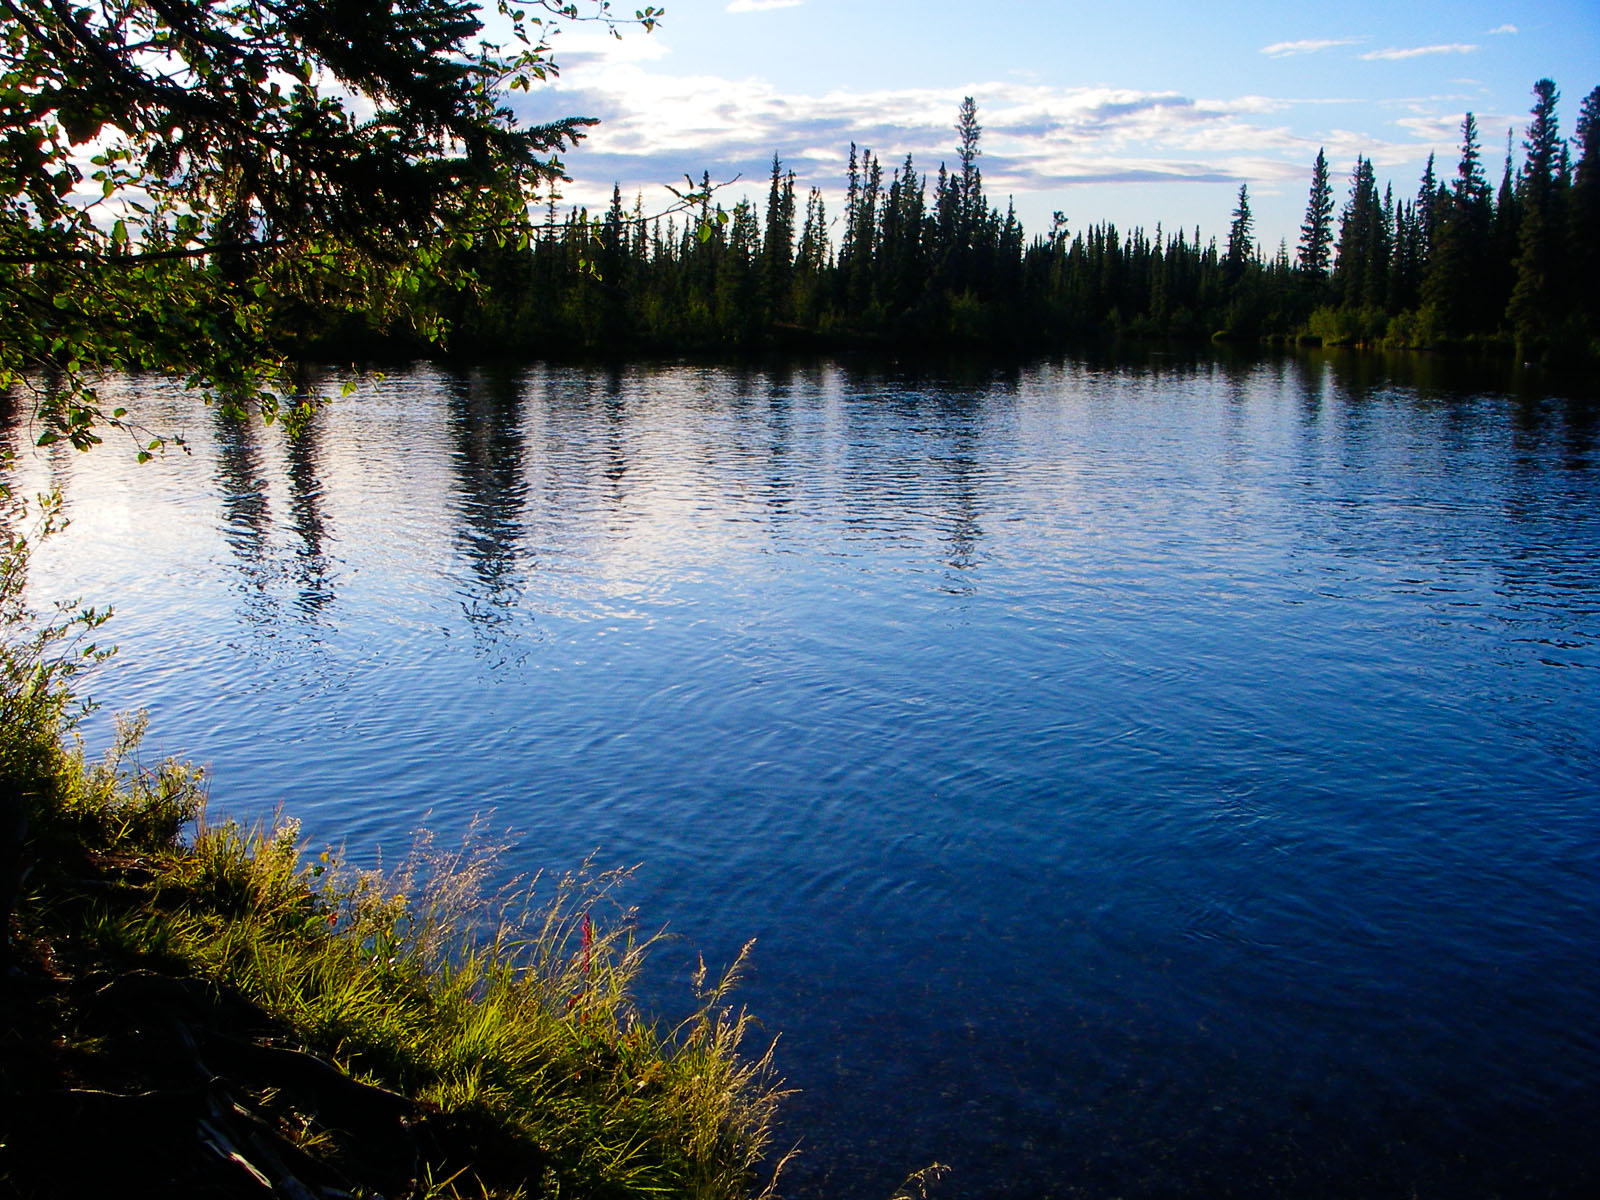  From the Delta Clearwater River in Alaska.